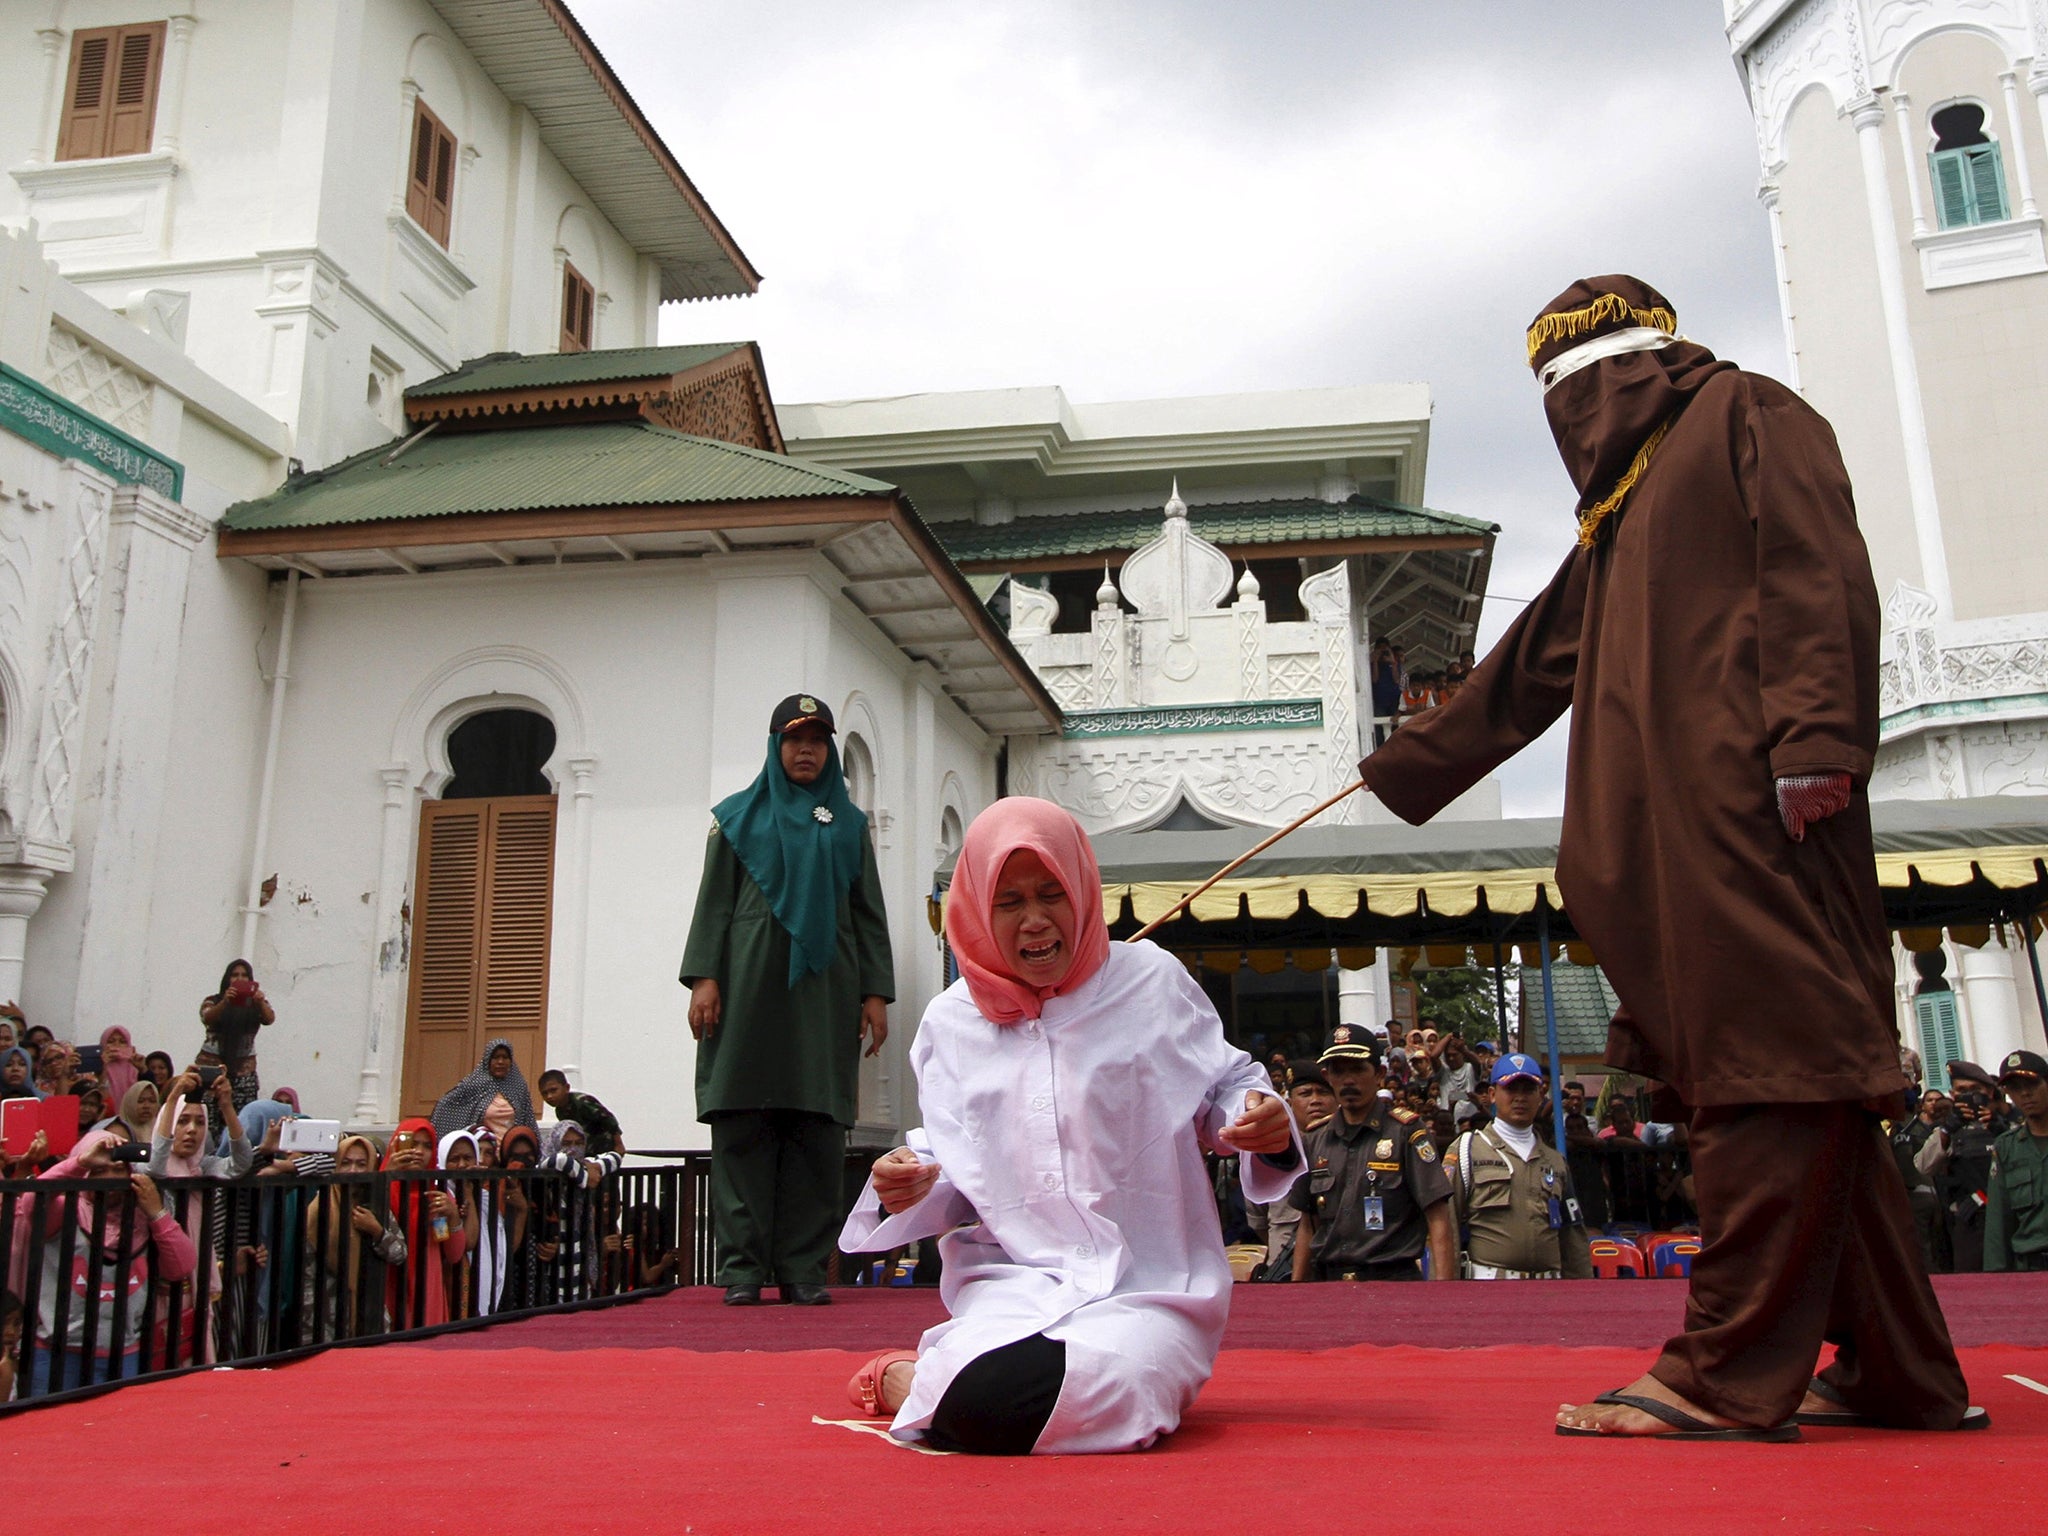 Nur Elita received five strokes of the cane for having pre-marital sex with her boyfriend, according to local media. Aceh is the only province in Indonesia, the world's most populous Muslim country, where Islamic law is implemented